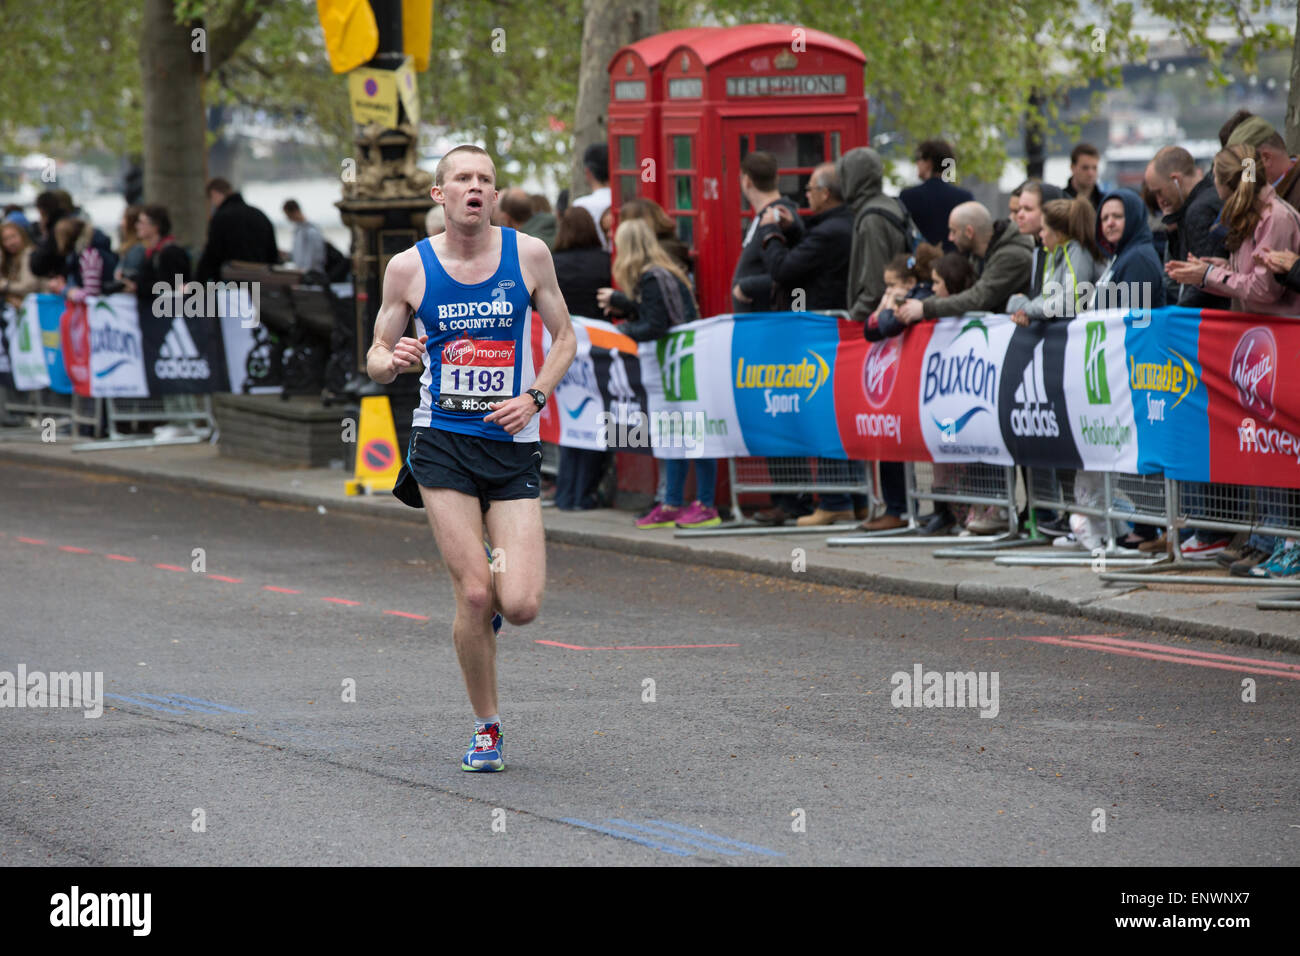 Will Mackay in the Virgin London Marathon 2015, finished 2:26:34 in 29th place. Stock Photo